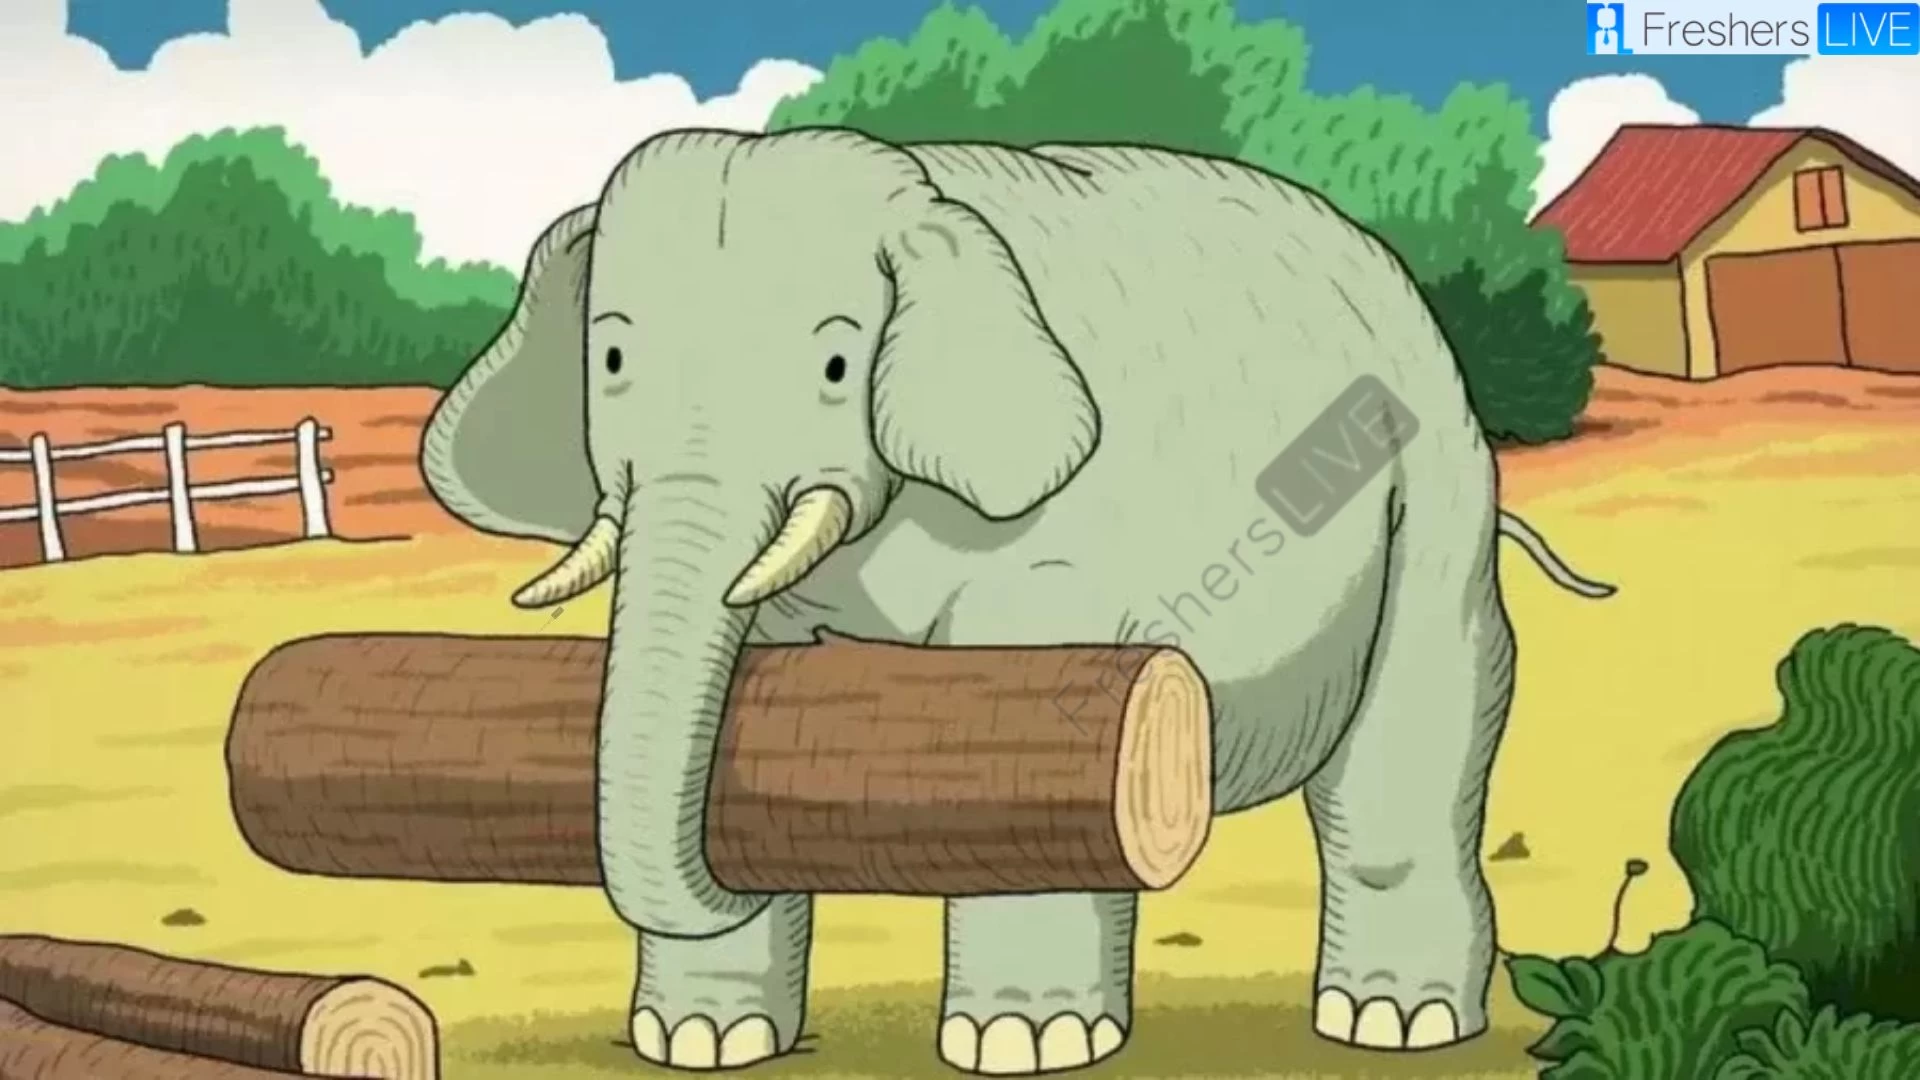 Can you help the elephant find his friend in 10 seconds?